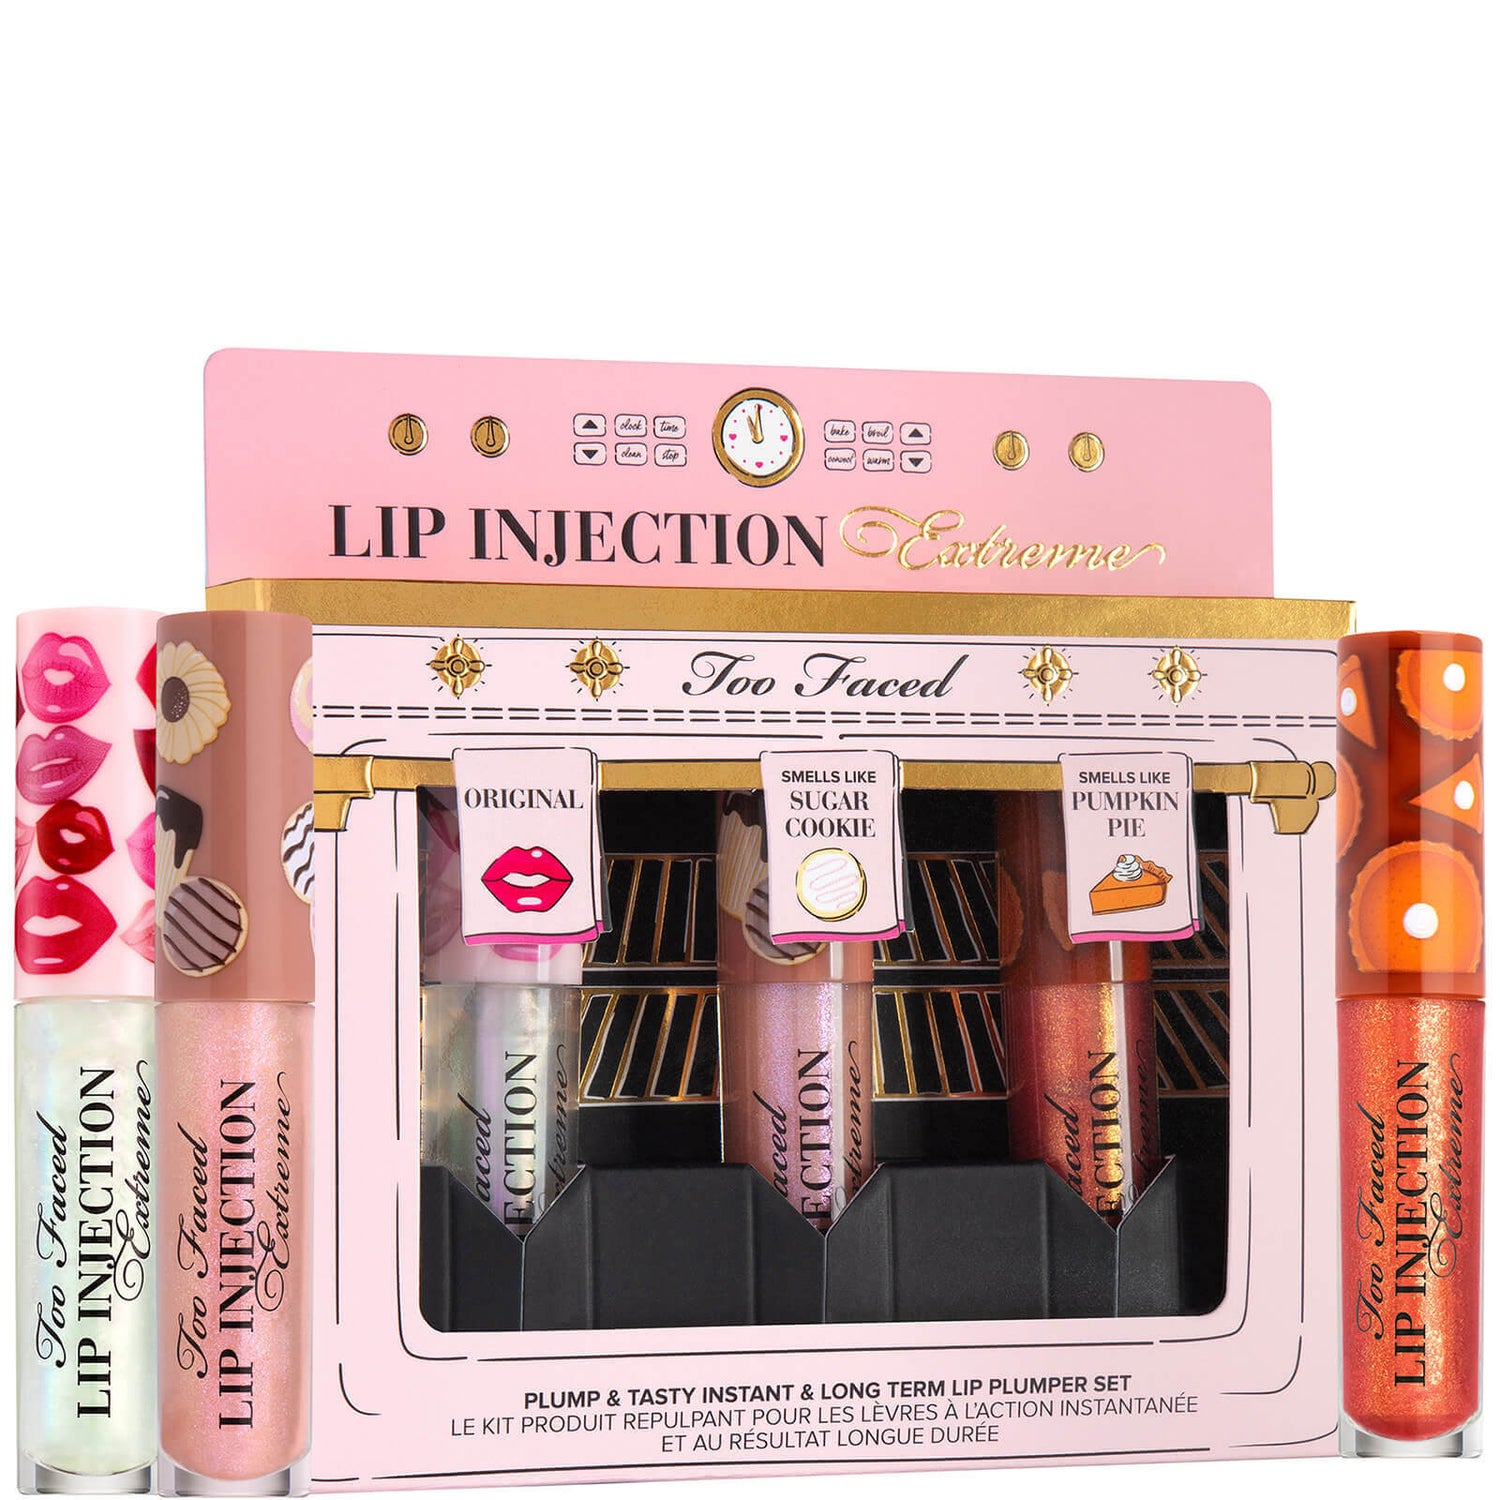 Too Faced Lip Injection Plump and Tasty Trio